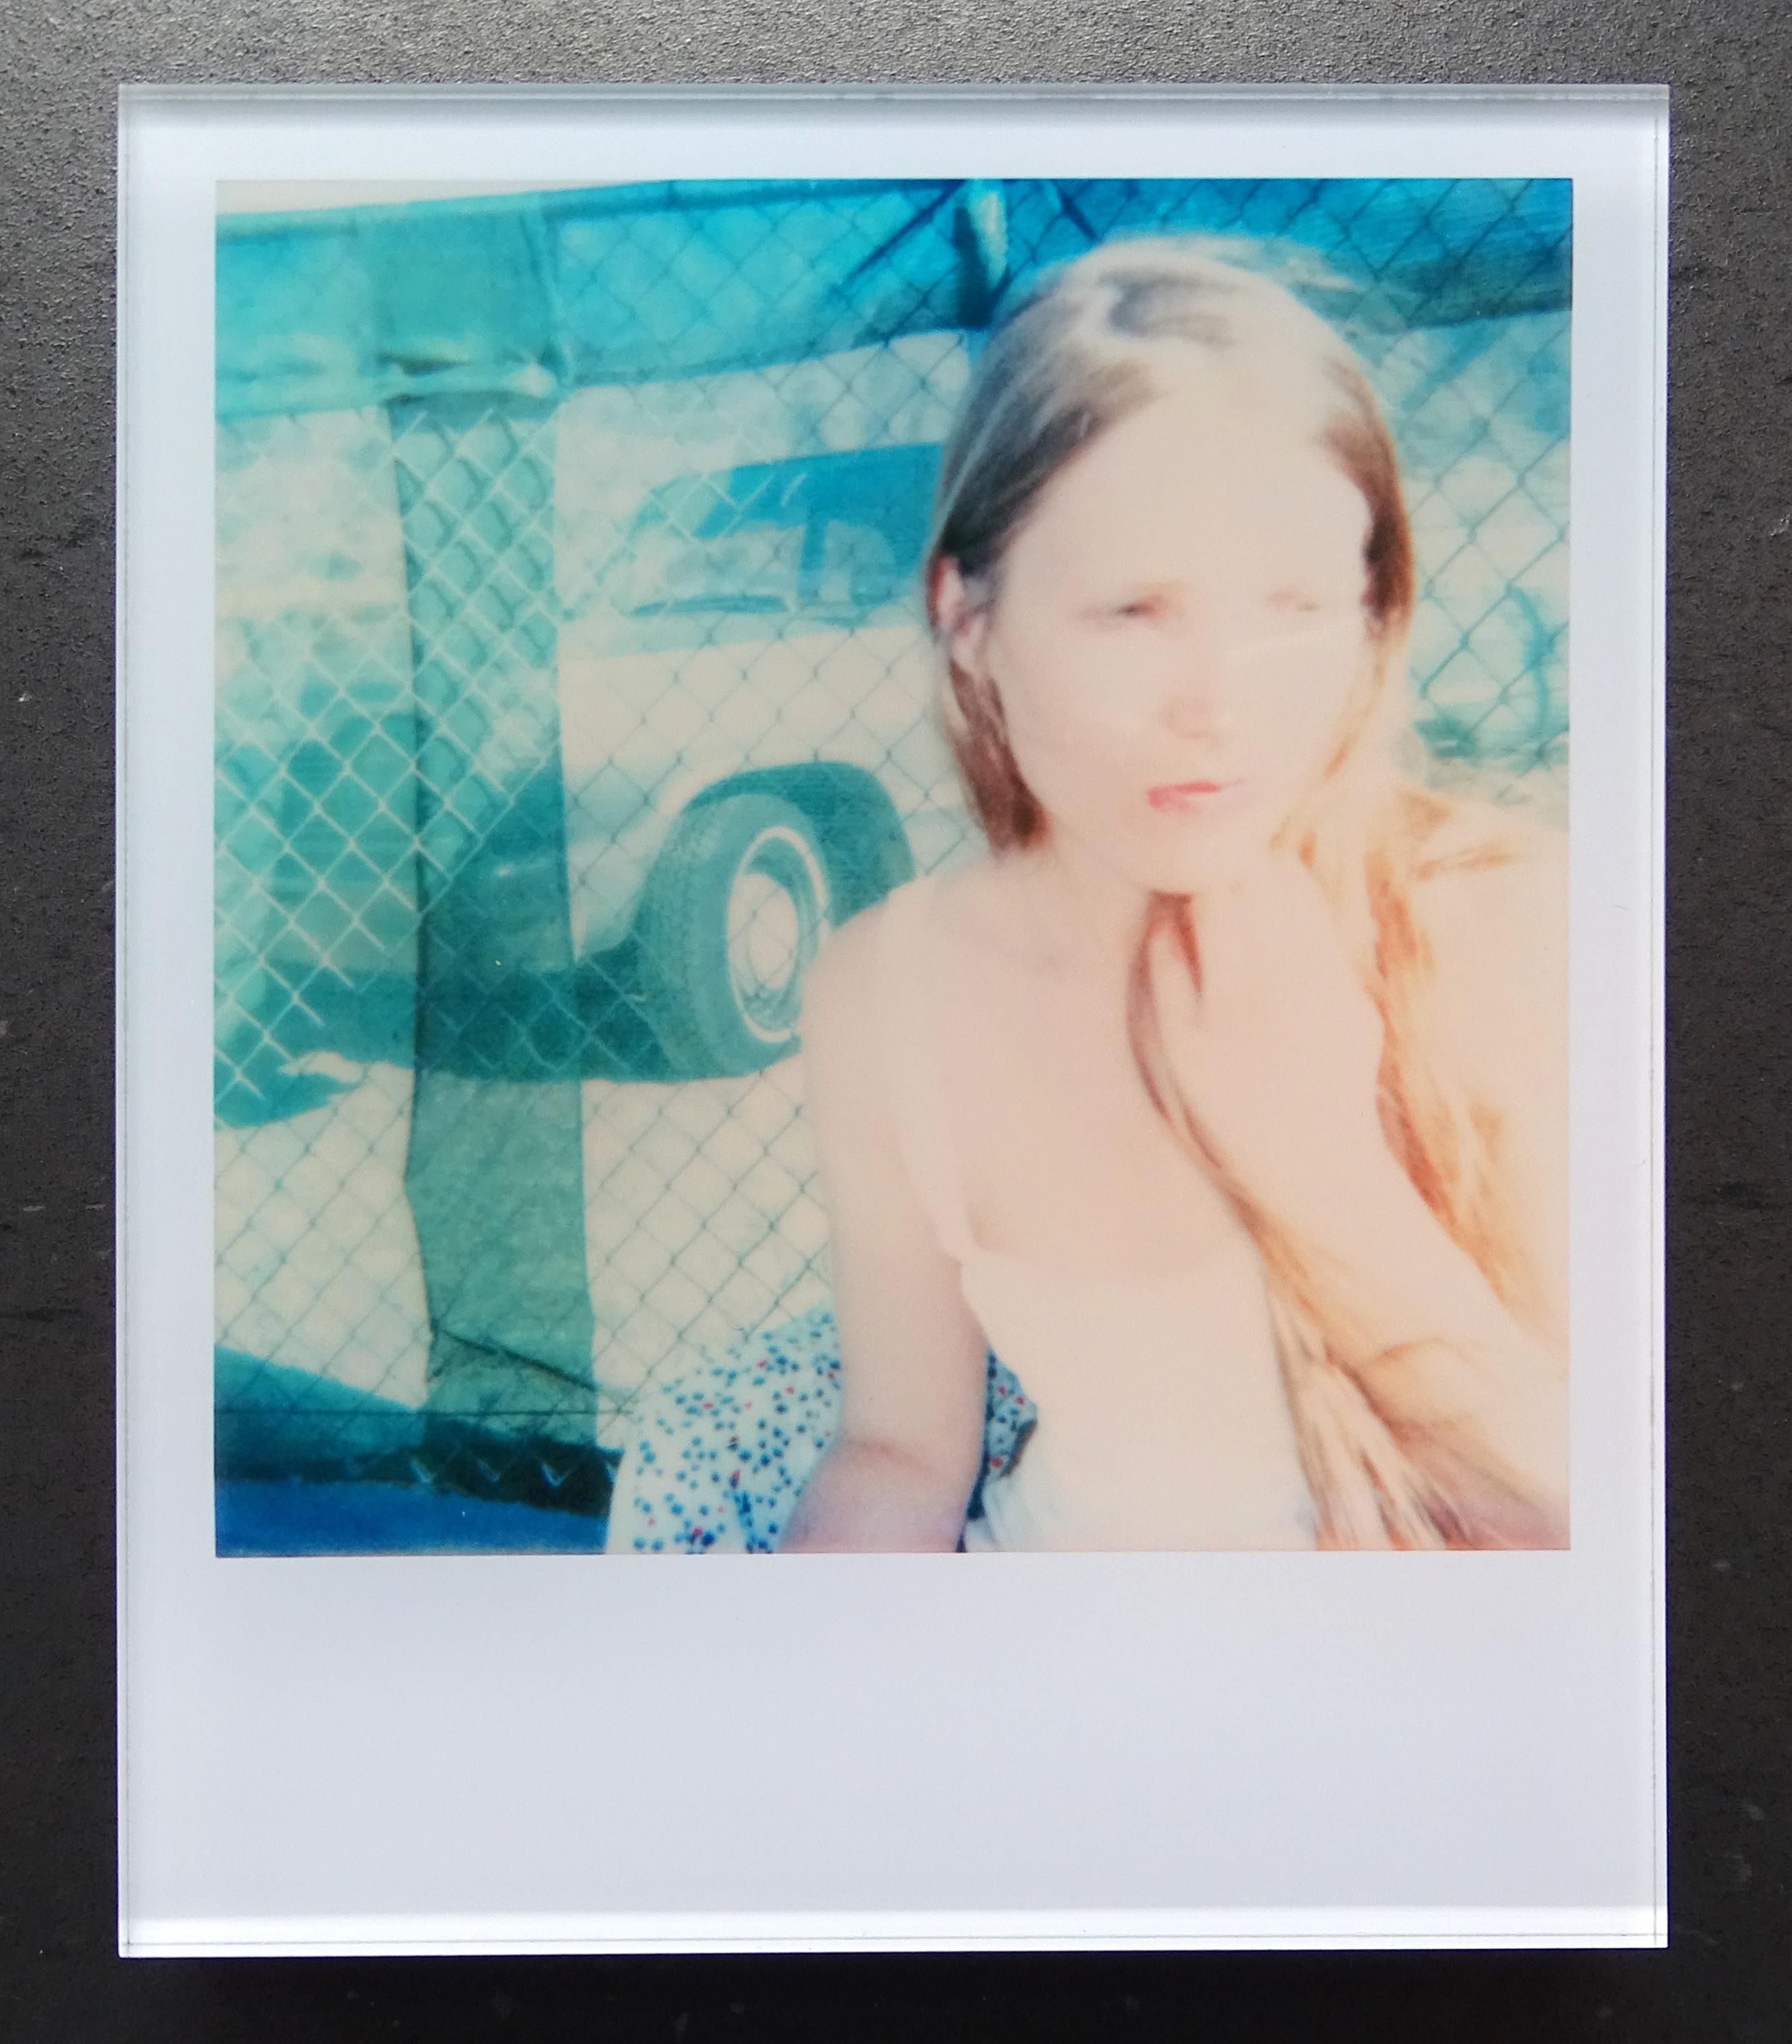 Stefanie Schneider's Minis
29 Day Dreams (29 Palms, CA) - self Portrait, 1999
signed and signature brand on verso
Lambda digital Color Photographs based on a Polaroid

Polaroid sized open Editions 1999-2013
10.7 x 8.8cm (Image 7.9x7.7cm)
mounted: